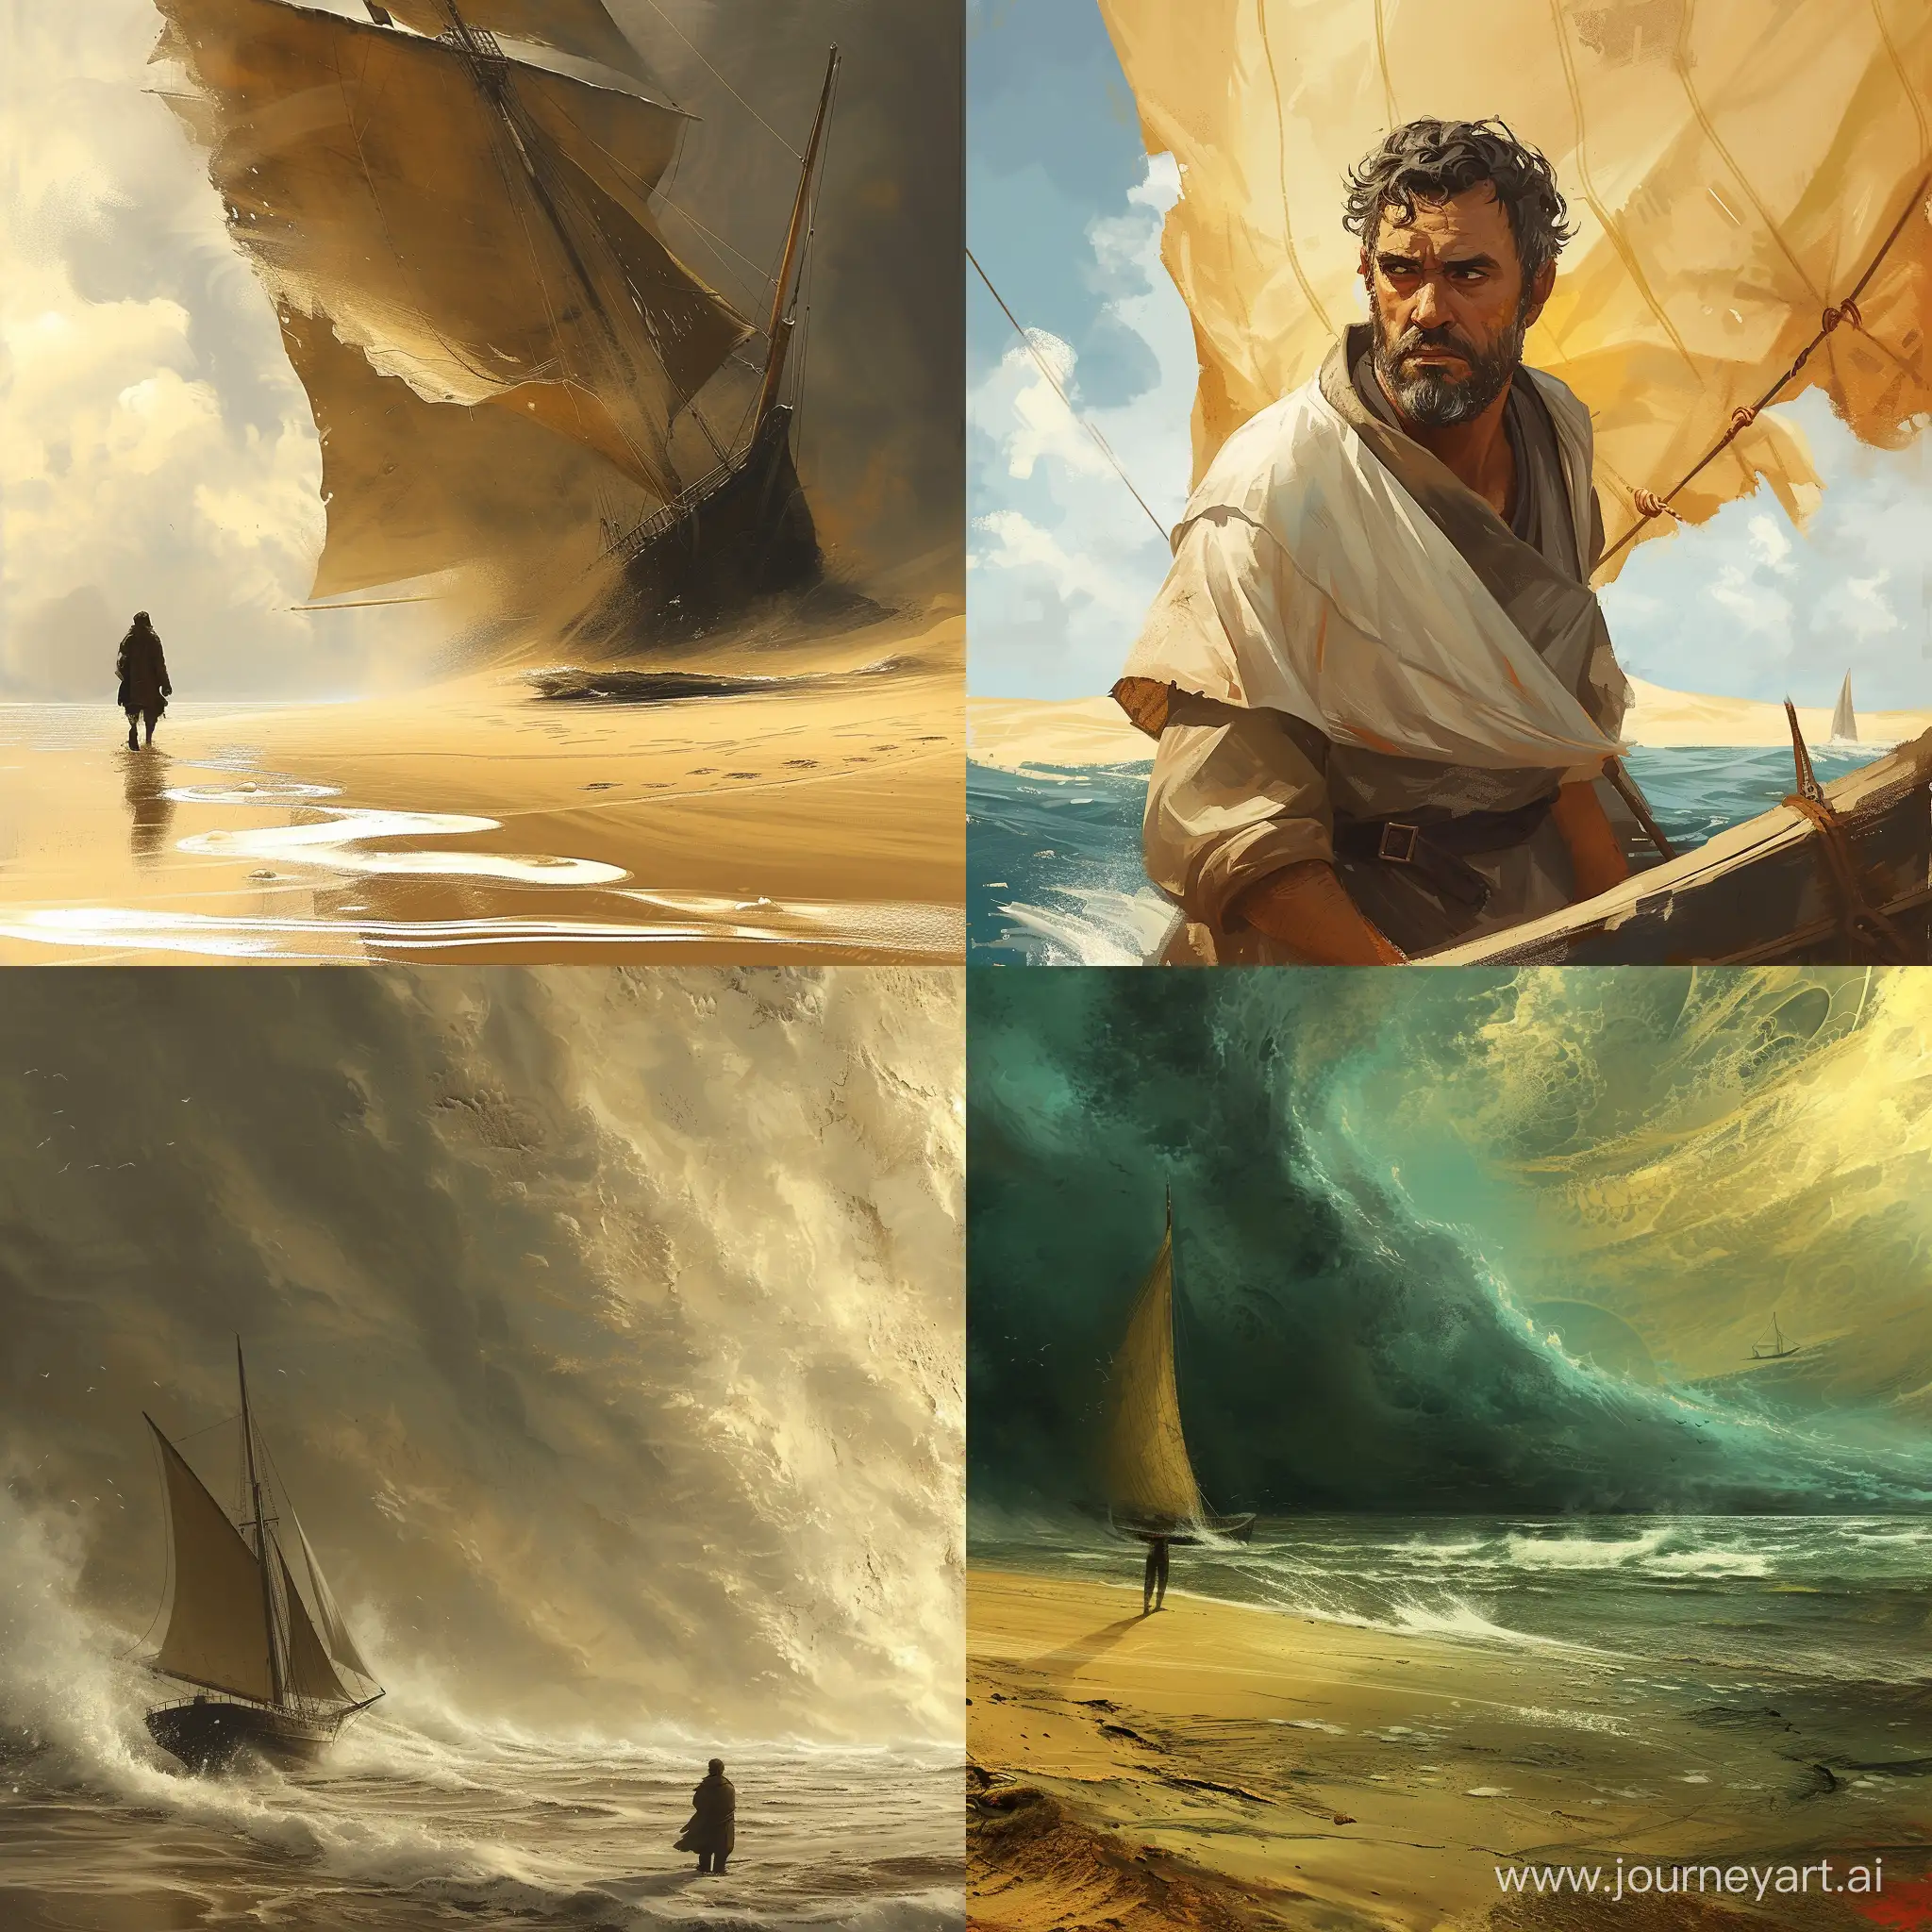 His sails hung limp, his spirit waned,
As Seafarer grappled with emotions unchained.
How could the ocean, once his home so grand,
Transform into a wasteland, a desert of sand?
